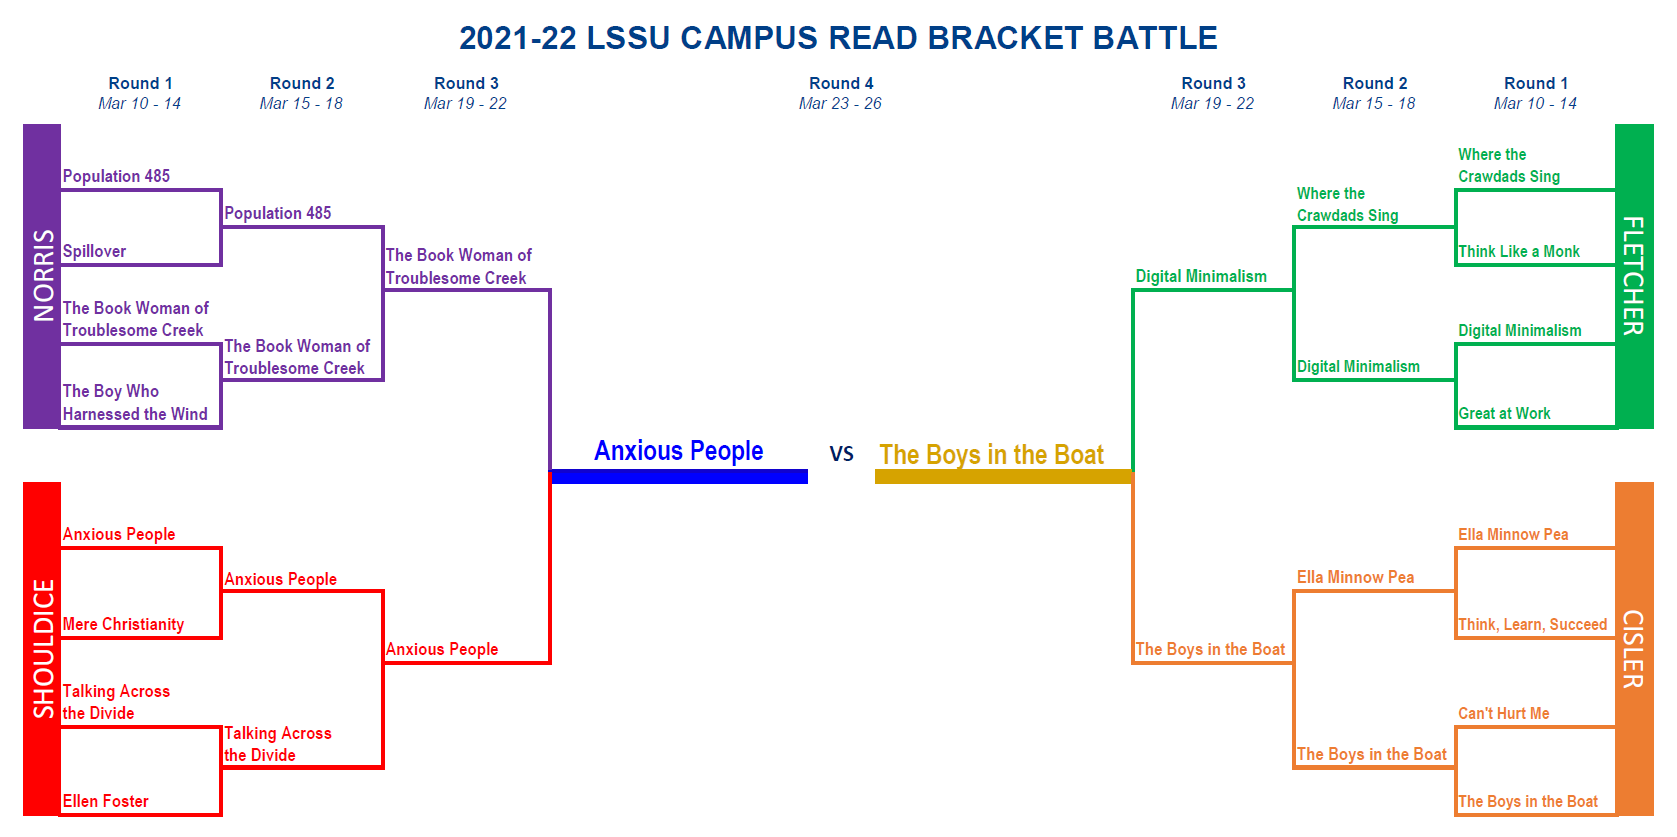 Image of Campus Read bracket, with Anxious People and The Boys in the Boat in the championship slots.